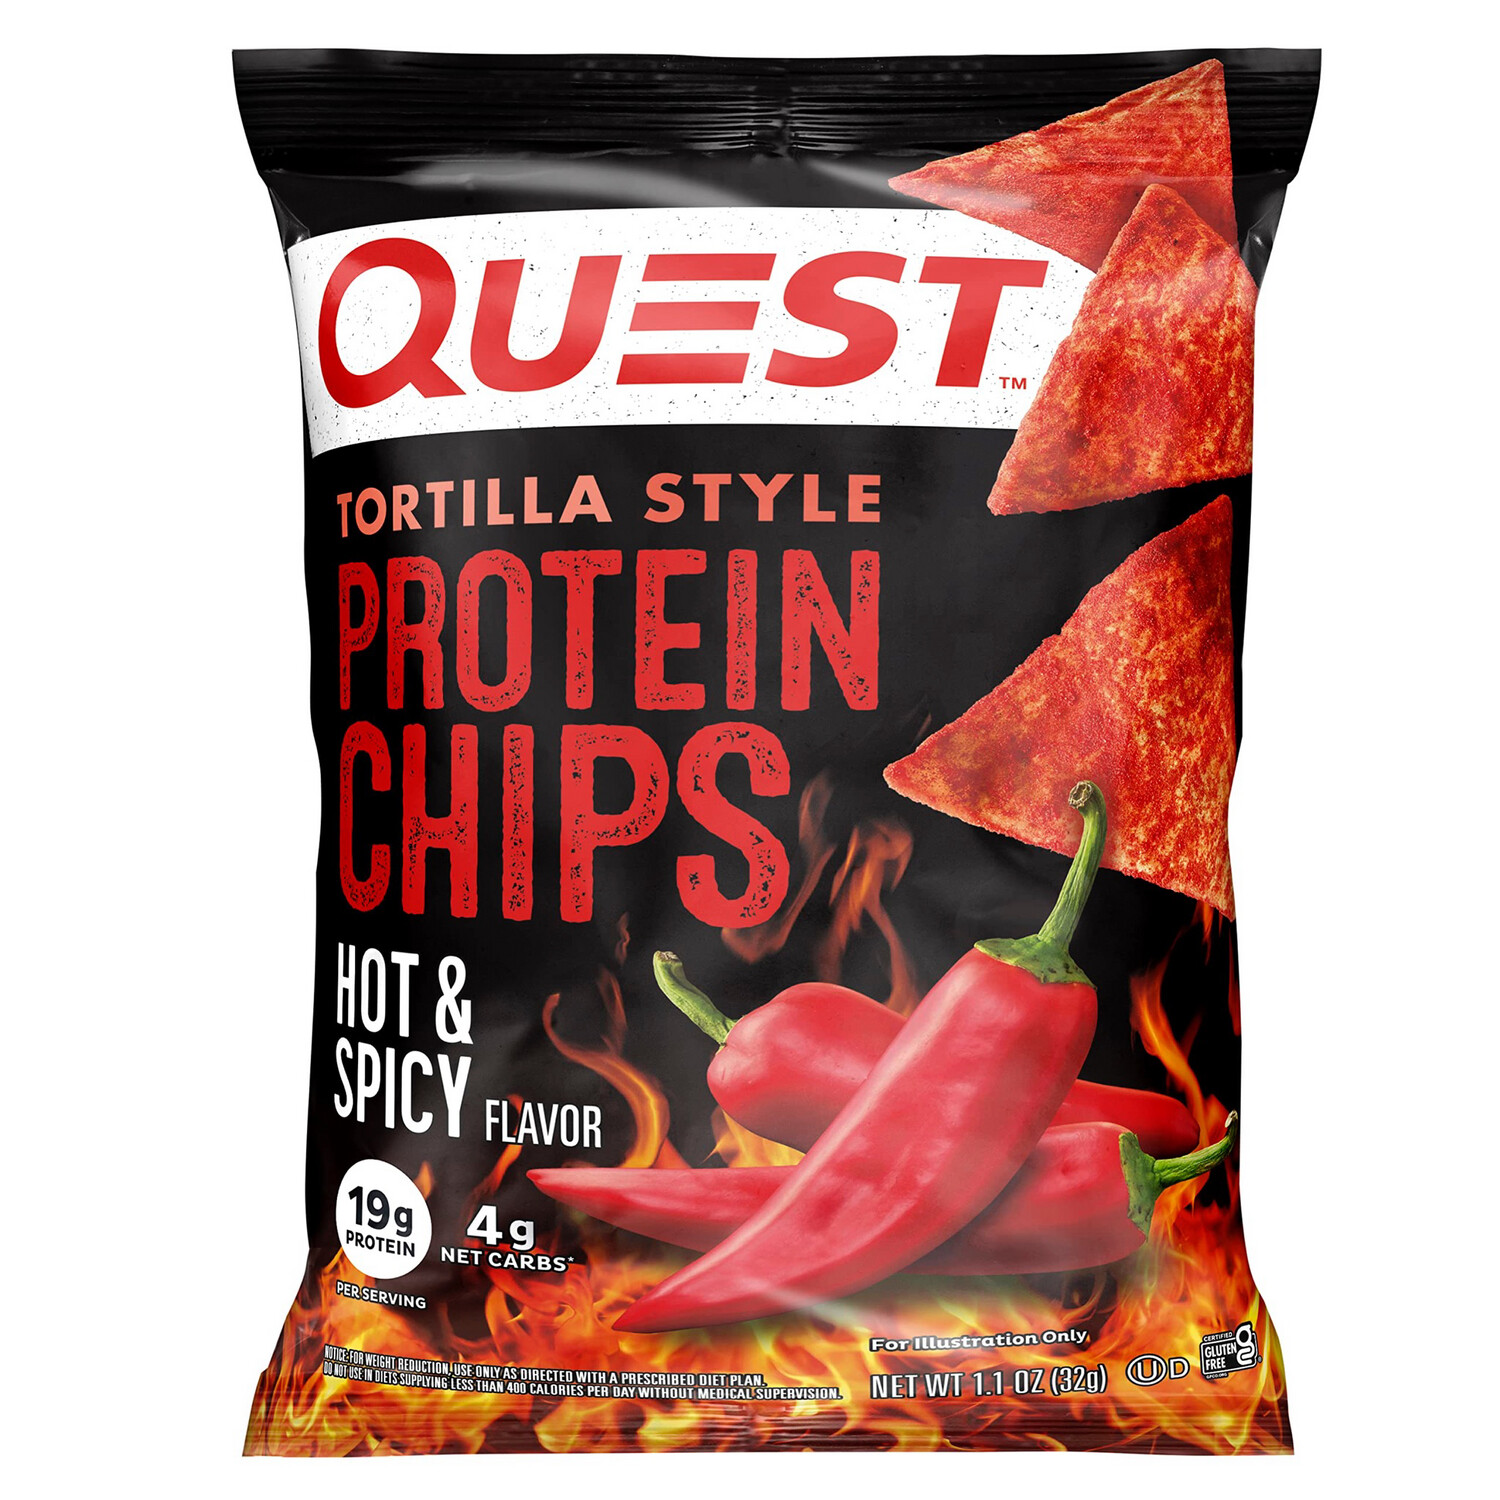 Quest Tortilla Style Protein Chips Hot And Spicy 